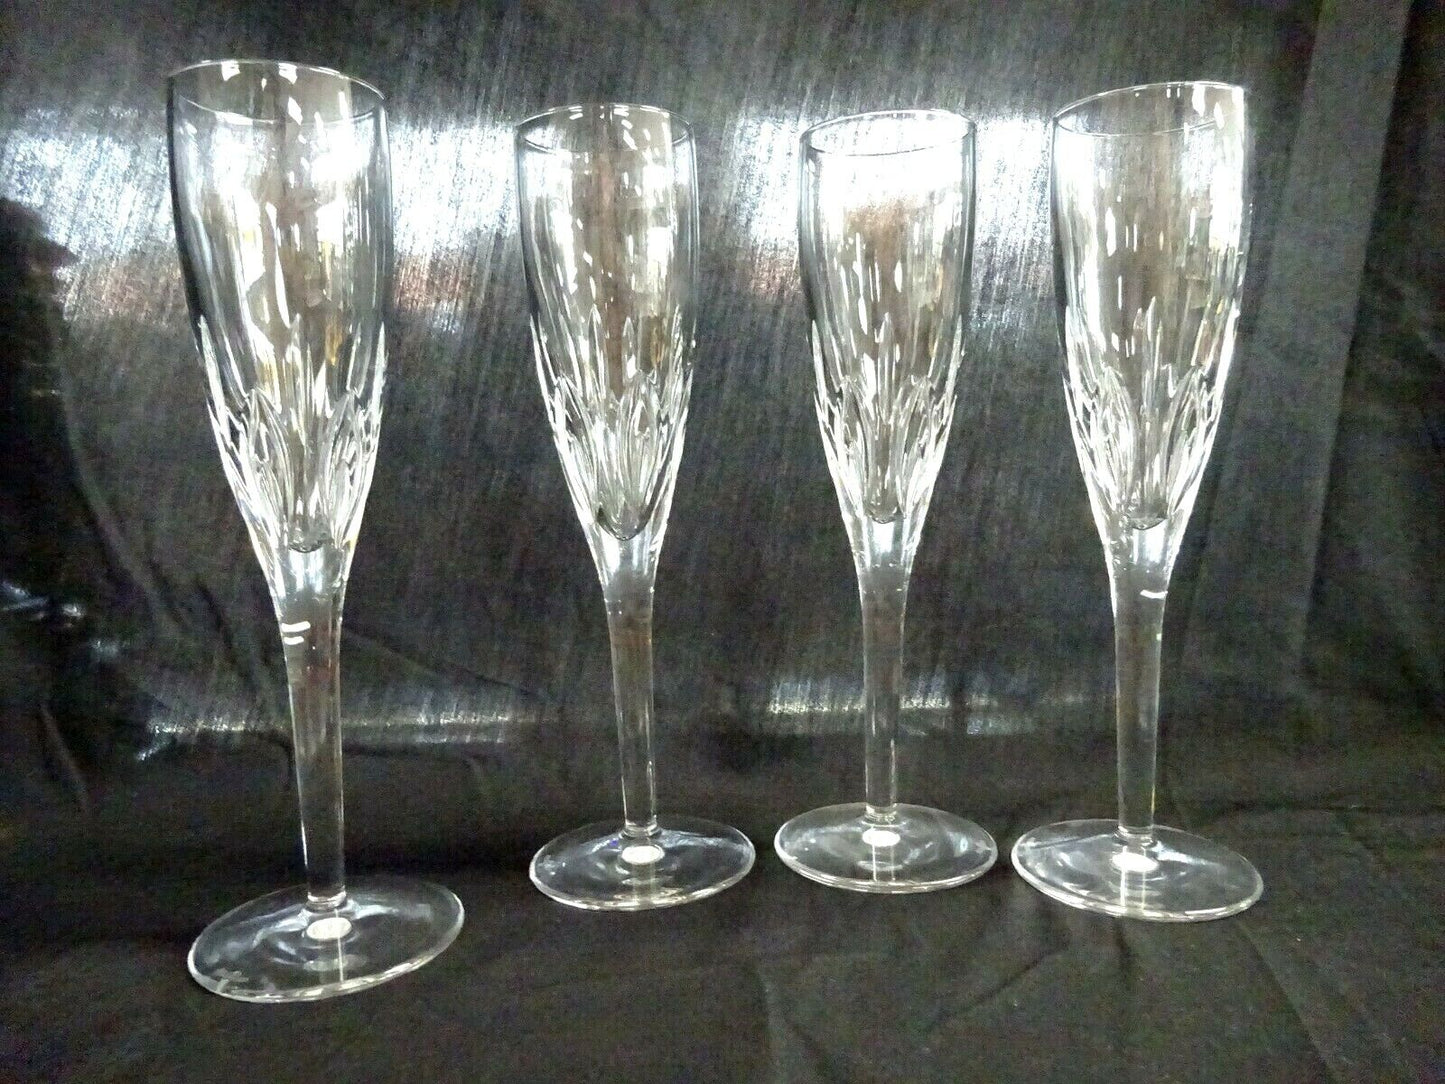 Waterford Irish Crystal ABBINGTON Champagne Flute,9.25", Lot of 4,MINT CONDITION